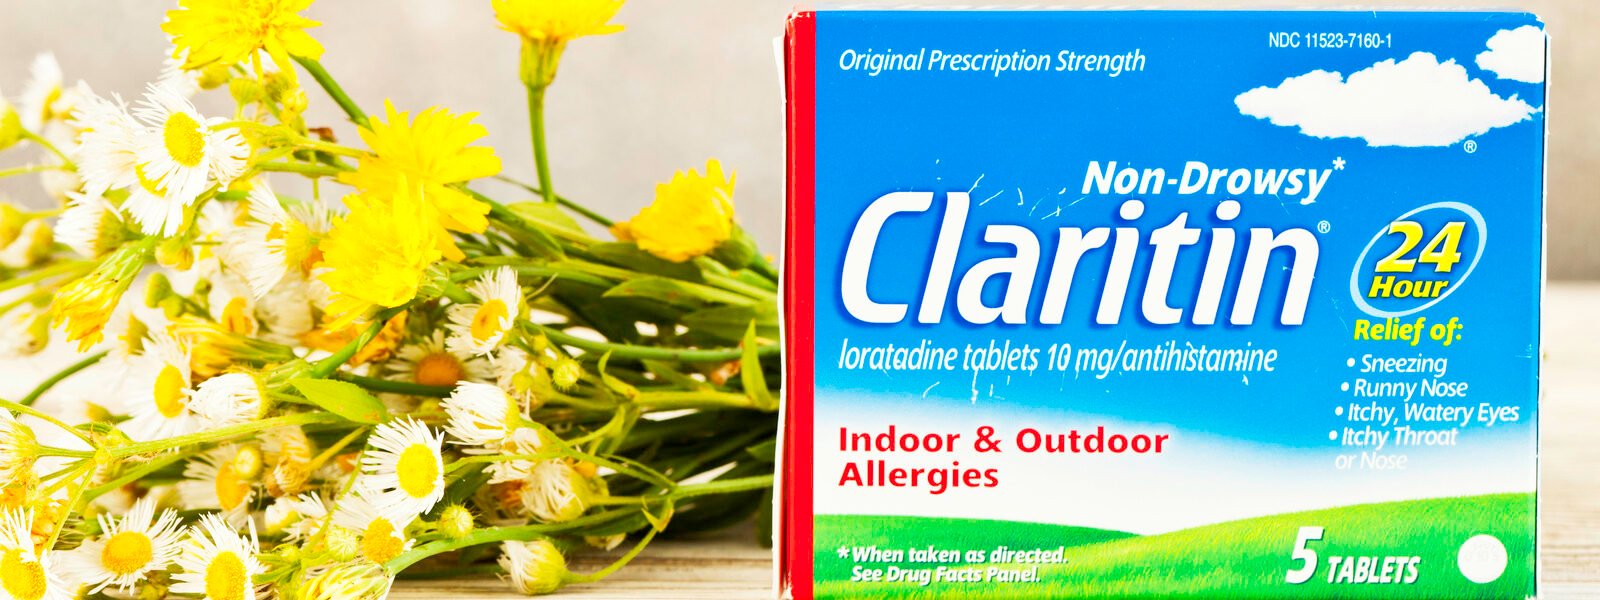 Claritin Vs. Generic: Which Is Better? Here's What We Know - Health Digest